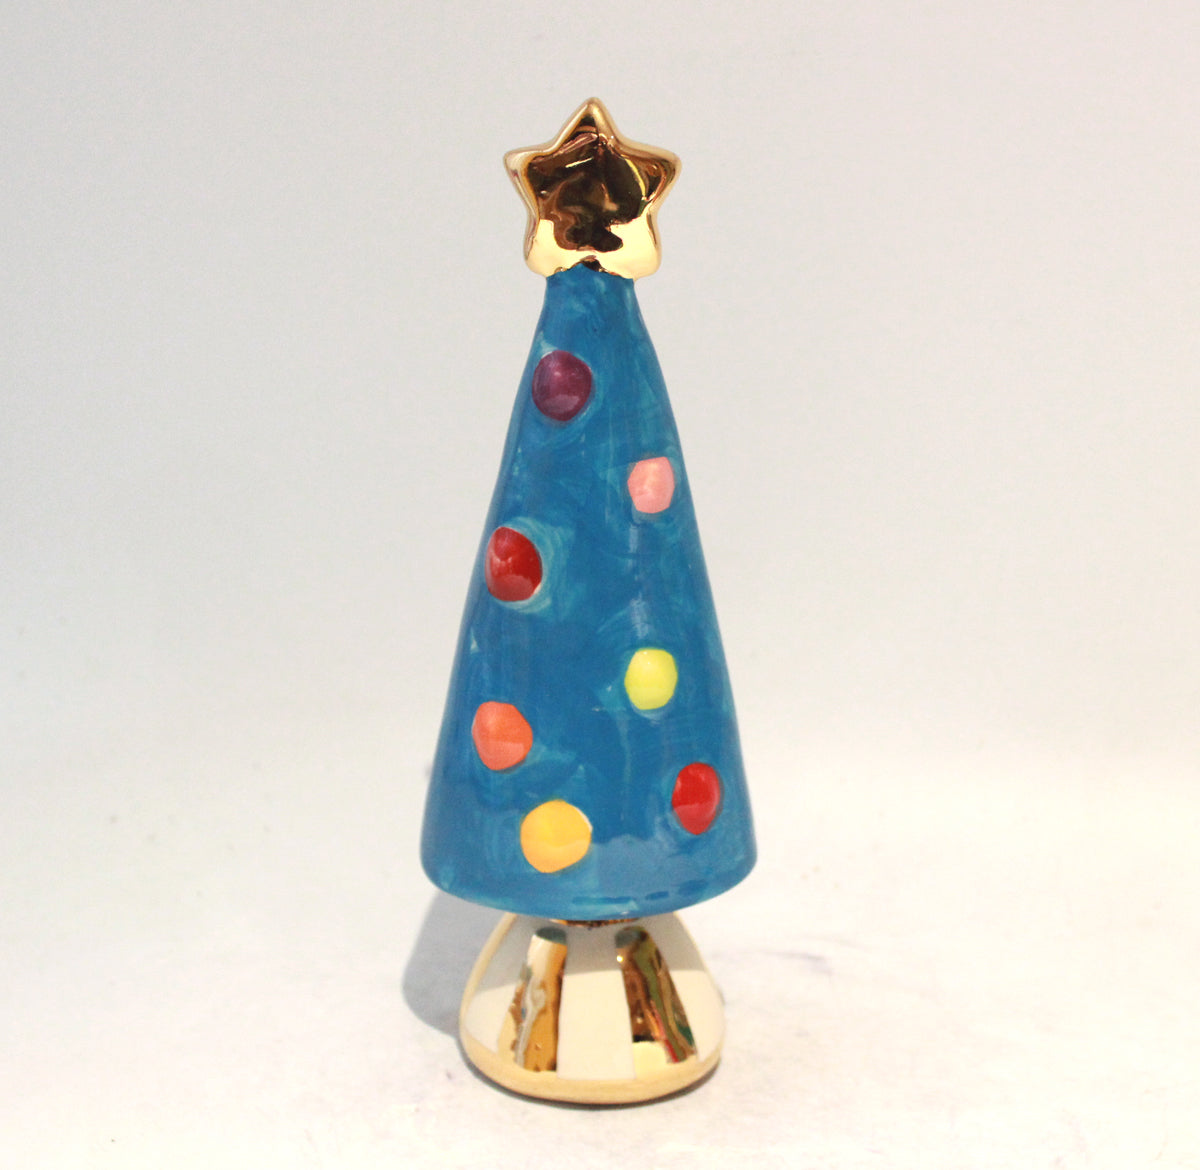 Small Christmas Tree in Blue with Gold and White Striped Base